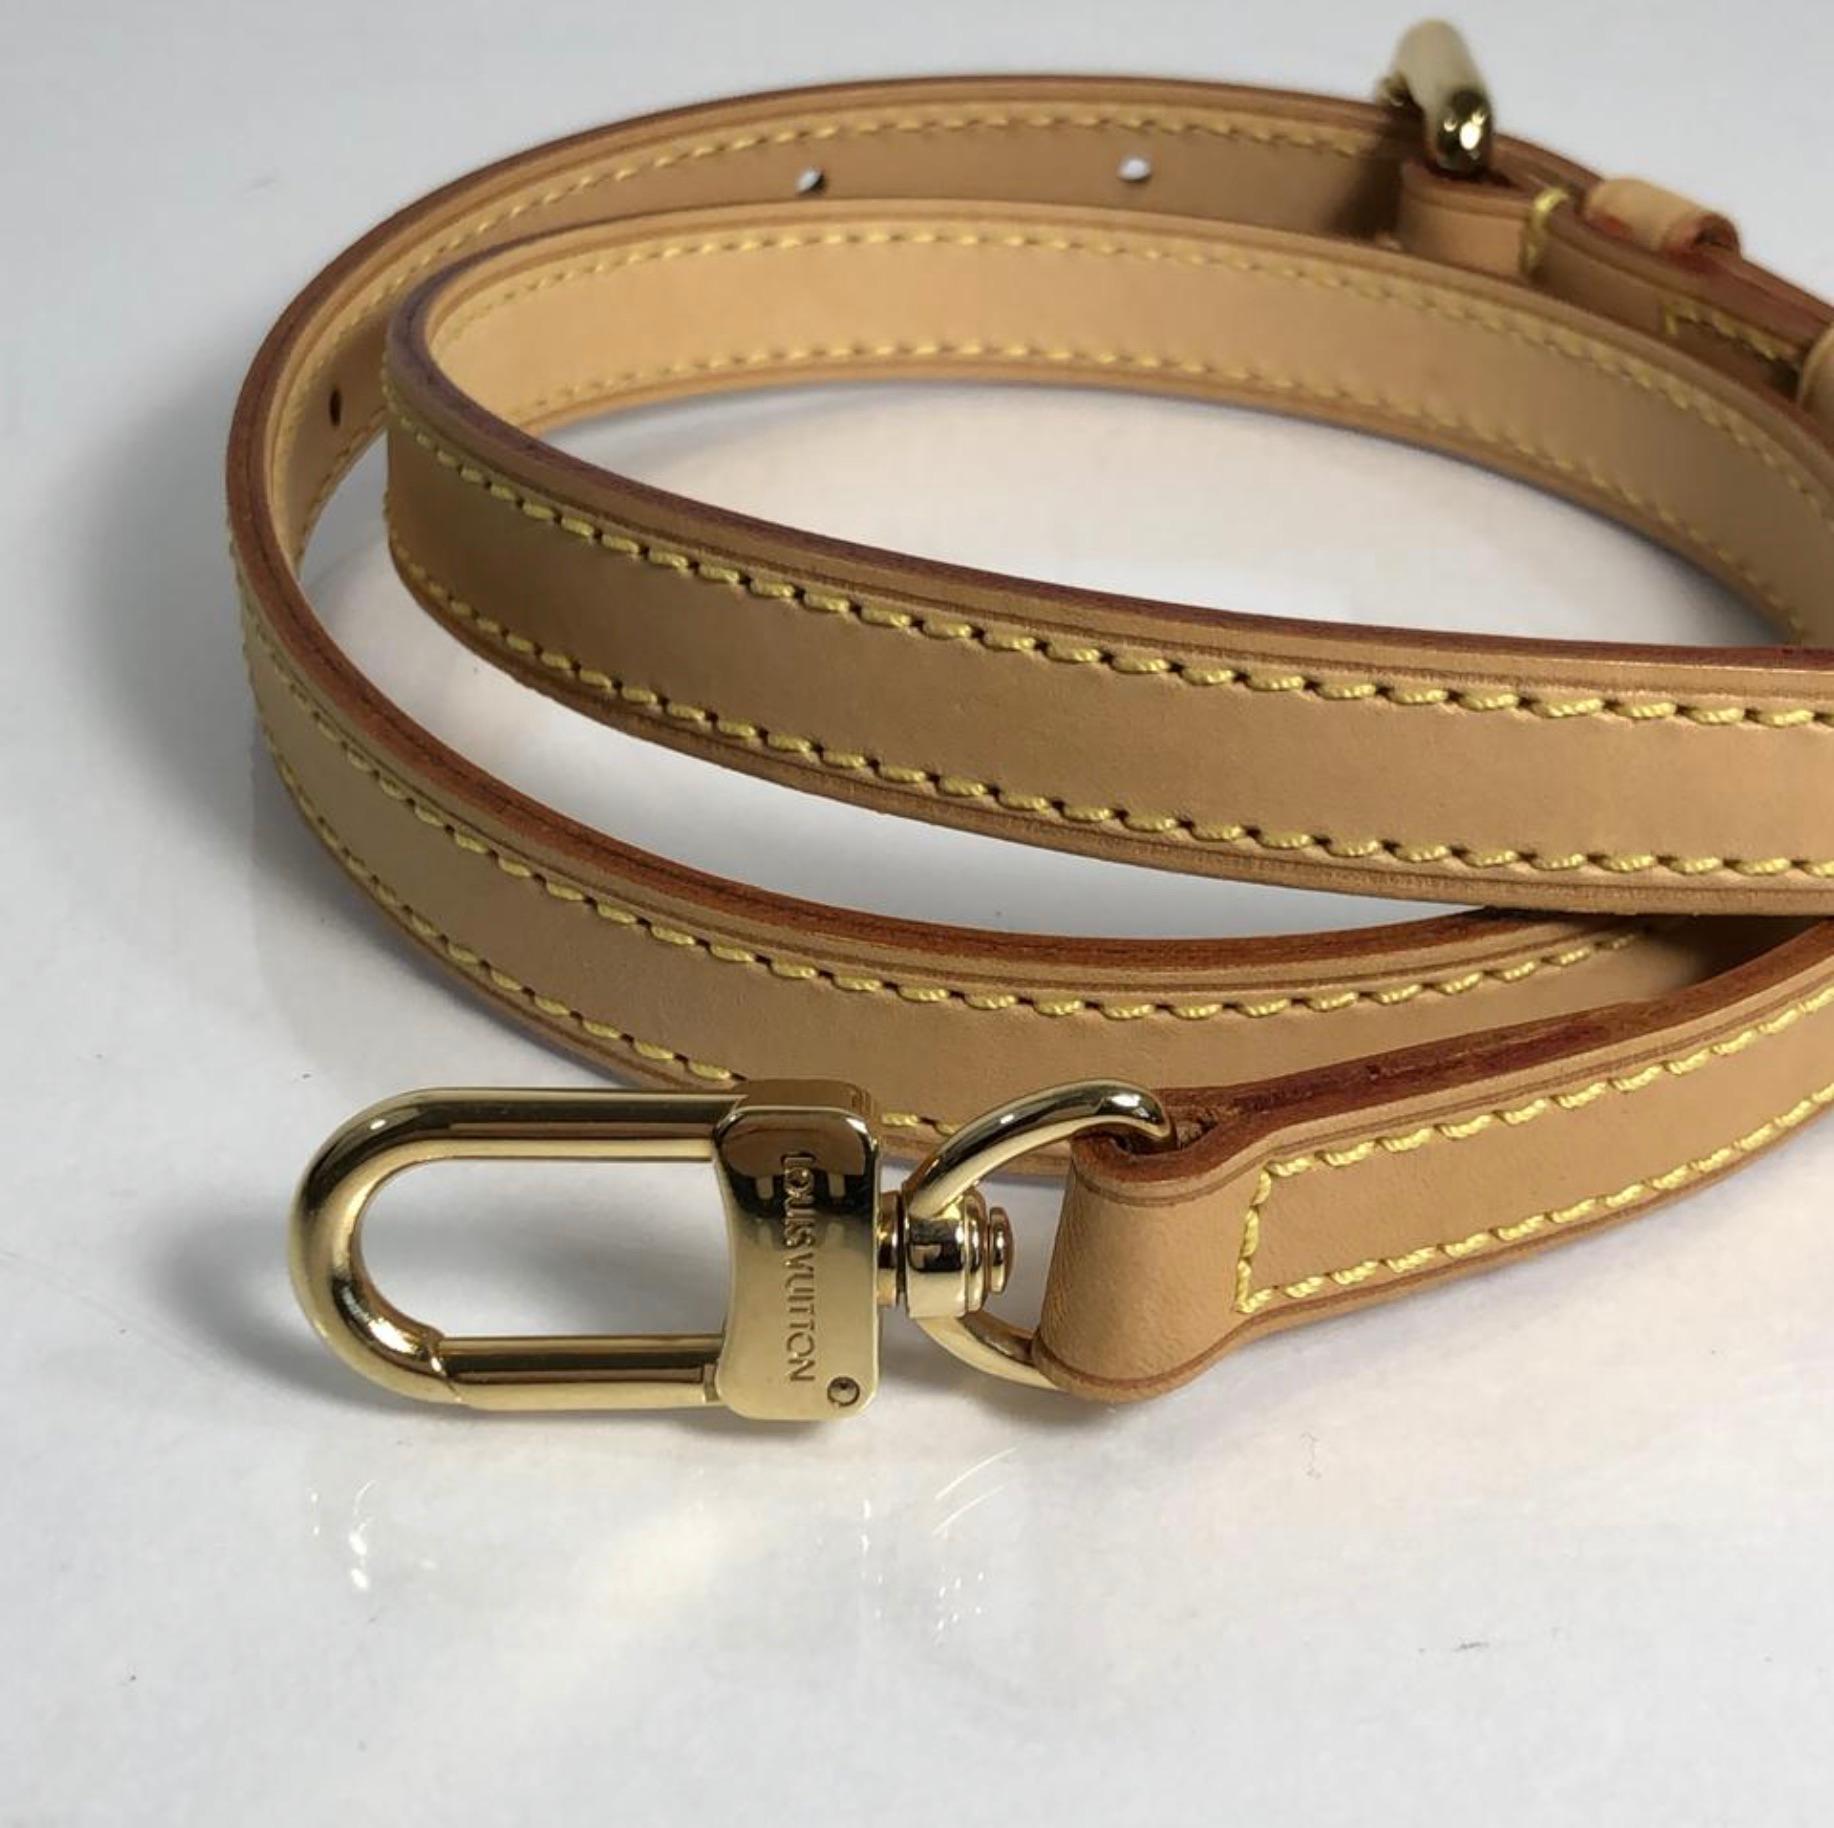 MODEL - Louis Vuitton Strap Vachette - Shoulder (Narrow and Adjustable)

CONDITION - Exceptional. Light vachette with no watermarks, no dryness and no cracking. Bright and shiny hardware with no tarnishing or chipping. No rips, holes, tears, stains